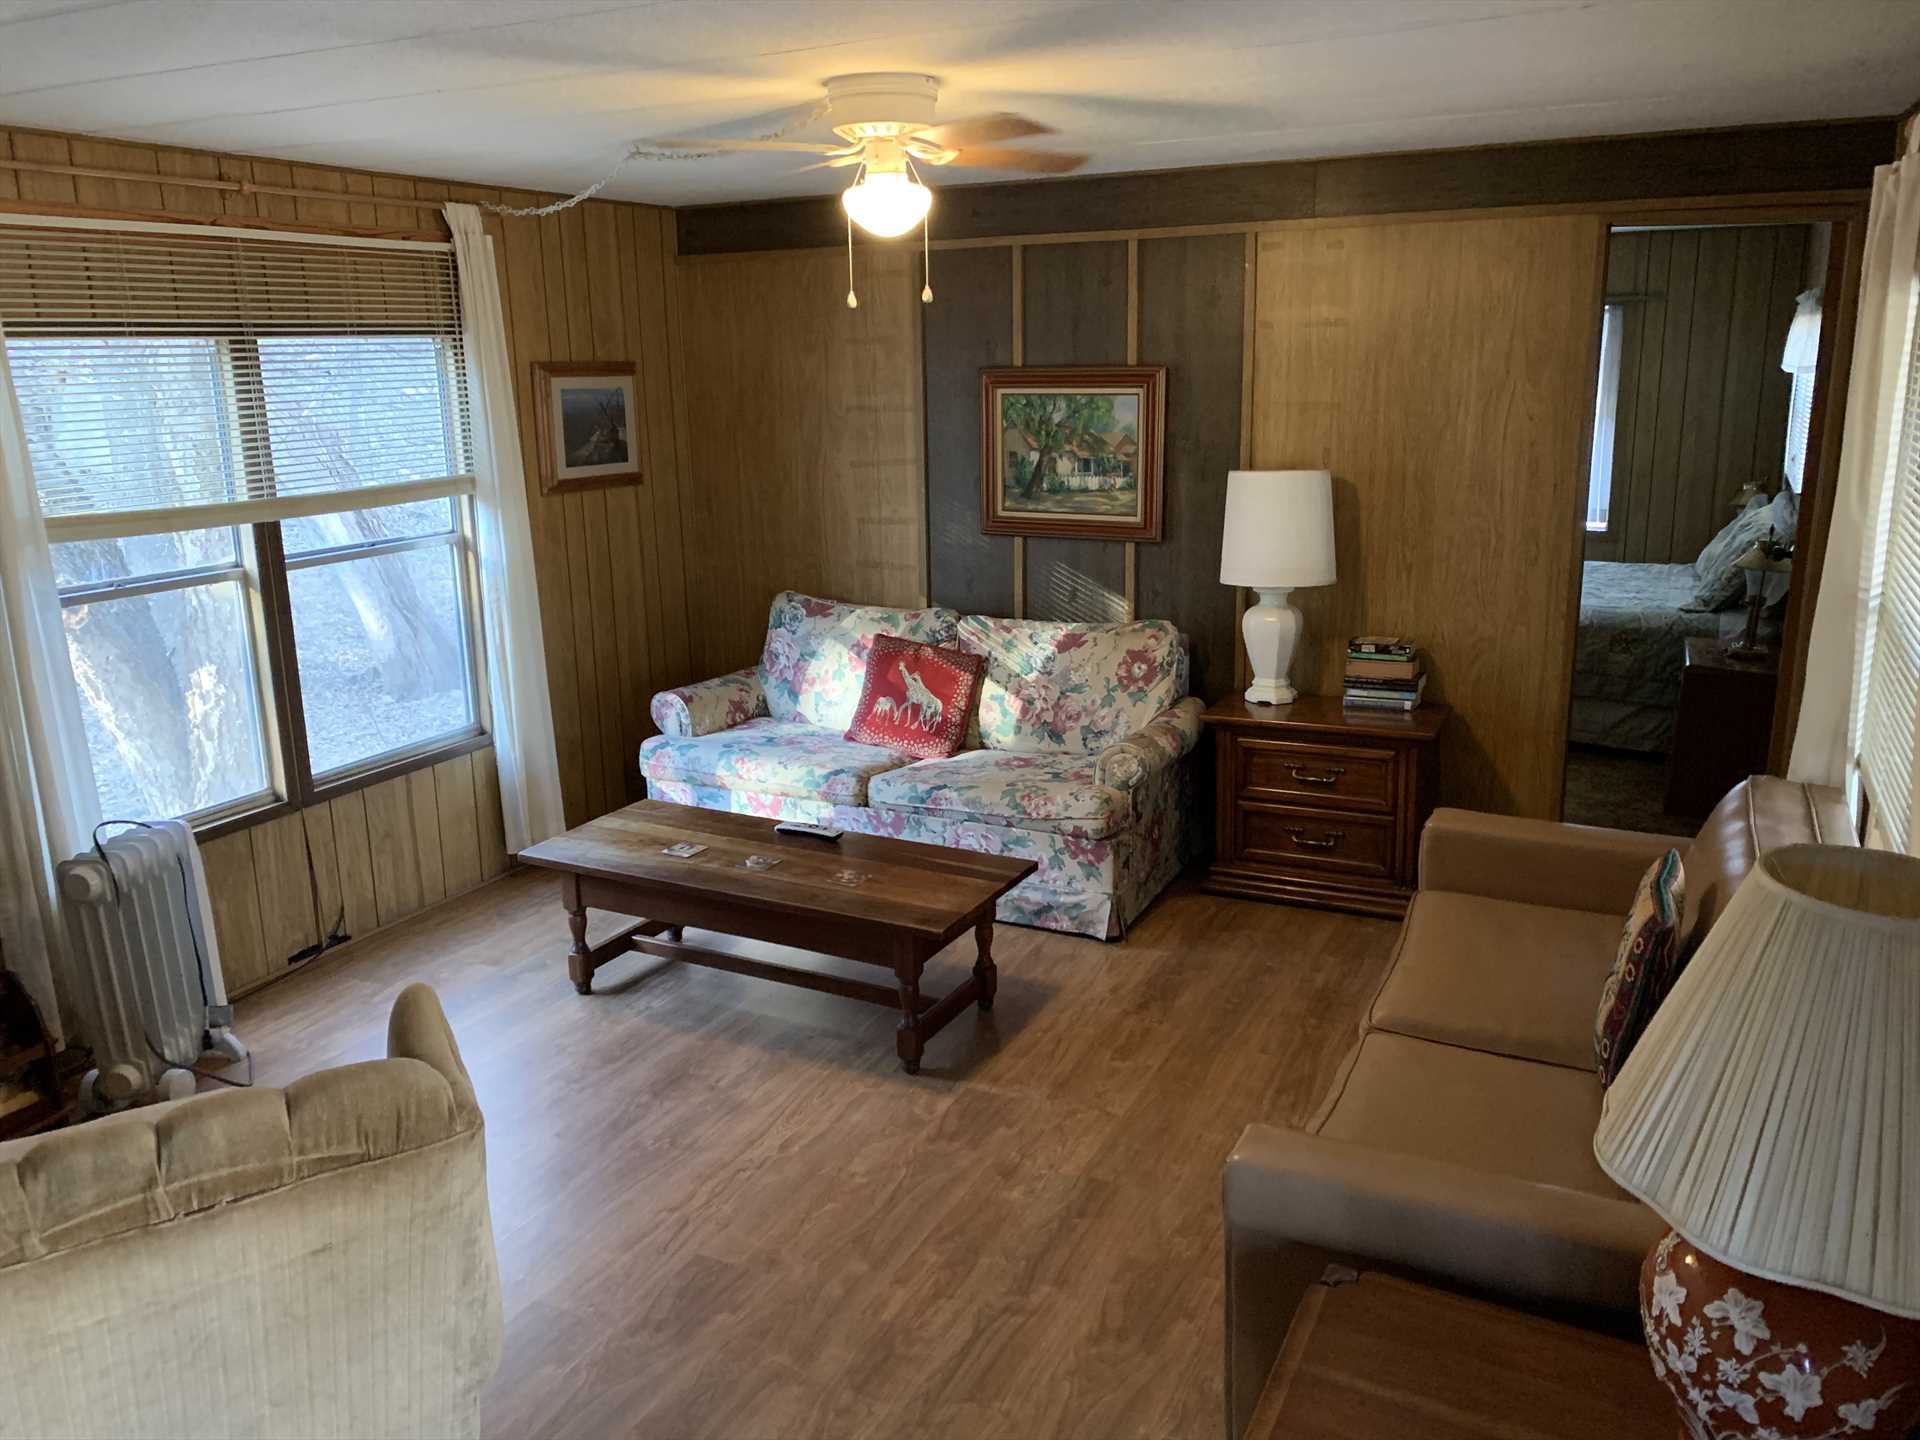                                                 Central AC and heat keep all of Mobile 1 comfortable, and there's a queen sleeper in the living area, all told, this warm and friendly rental sleeps six.